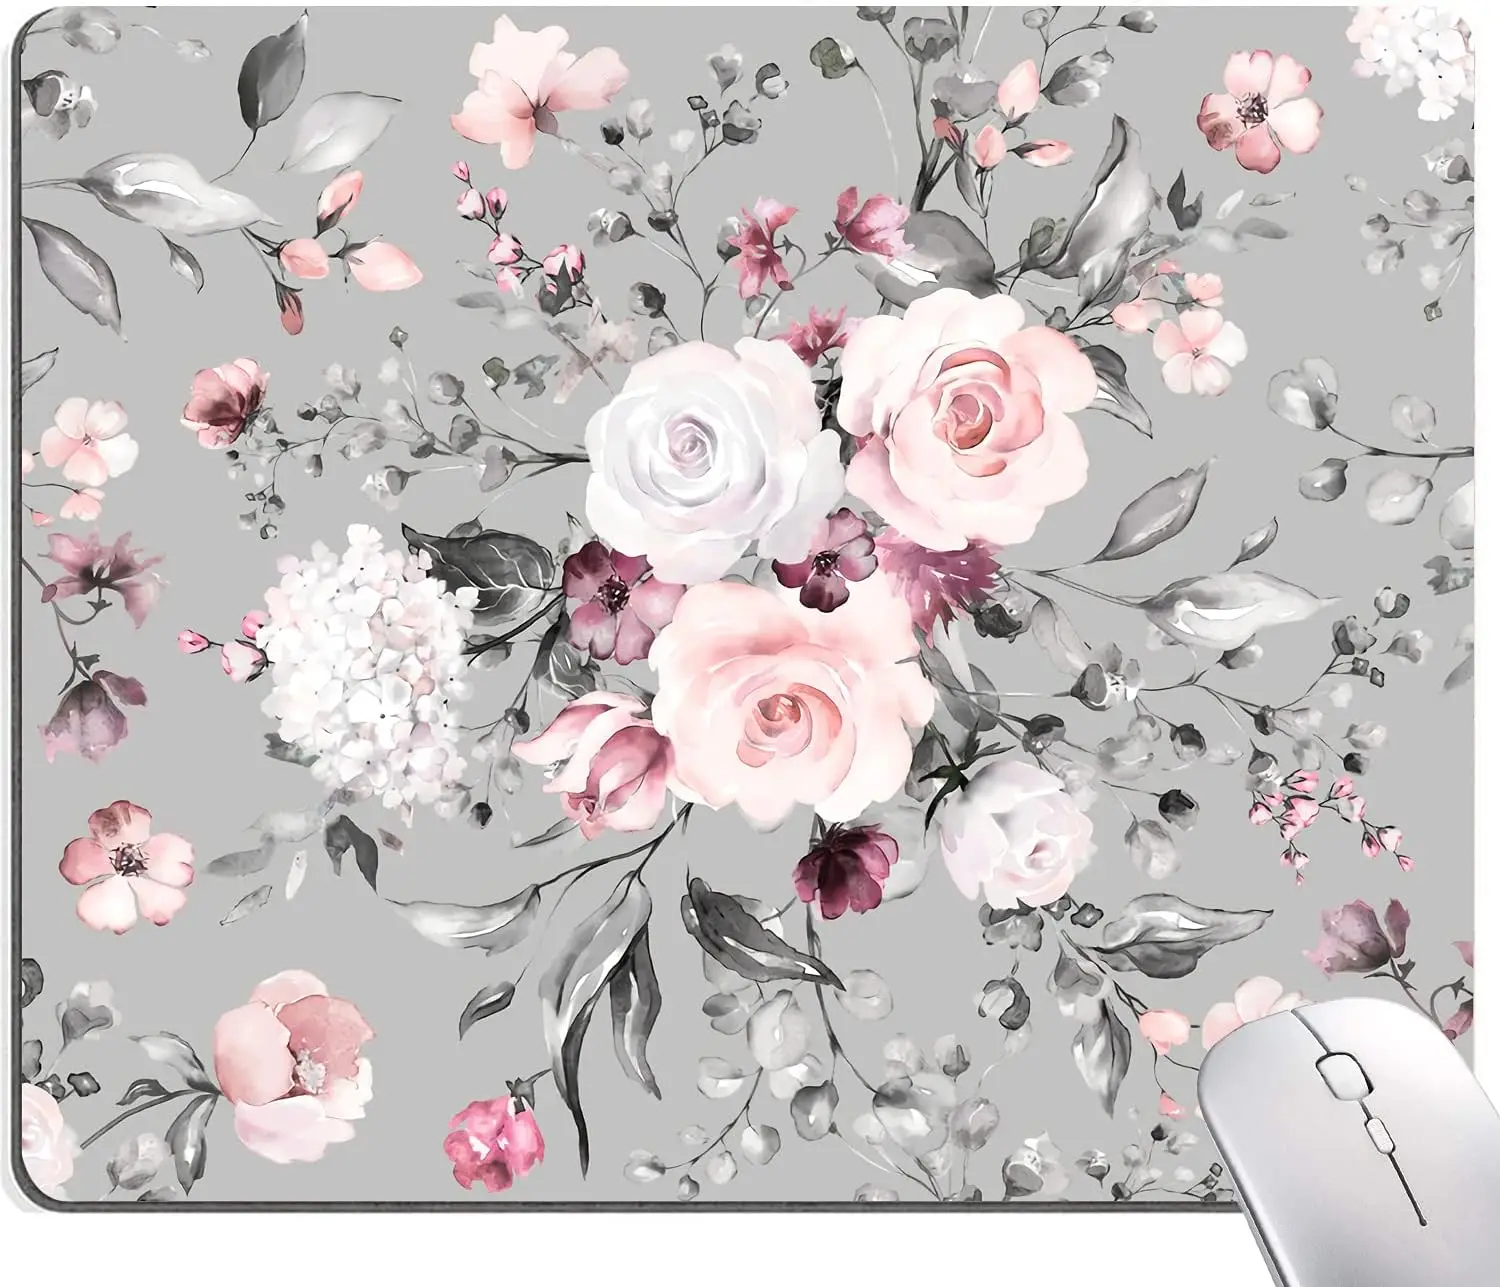 Mouse Pad Marble Mouse Pad Waterproof Mouse Pad Non-Slip Rubber Base MousePads for Office Laptop 9.5x7.9Inch Pink Roses Flower